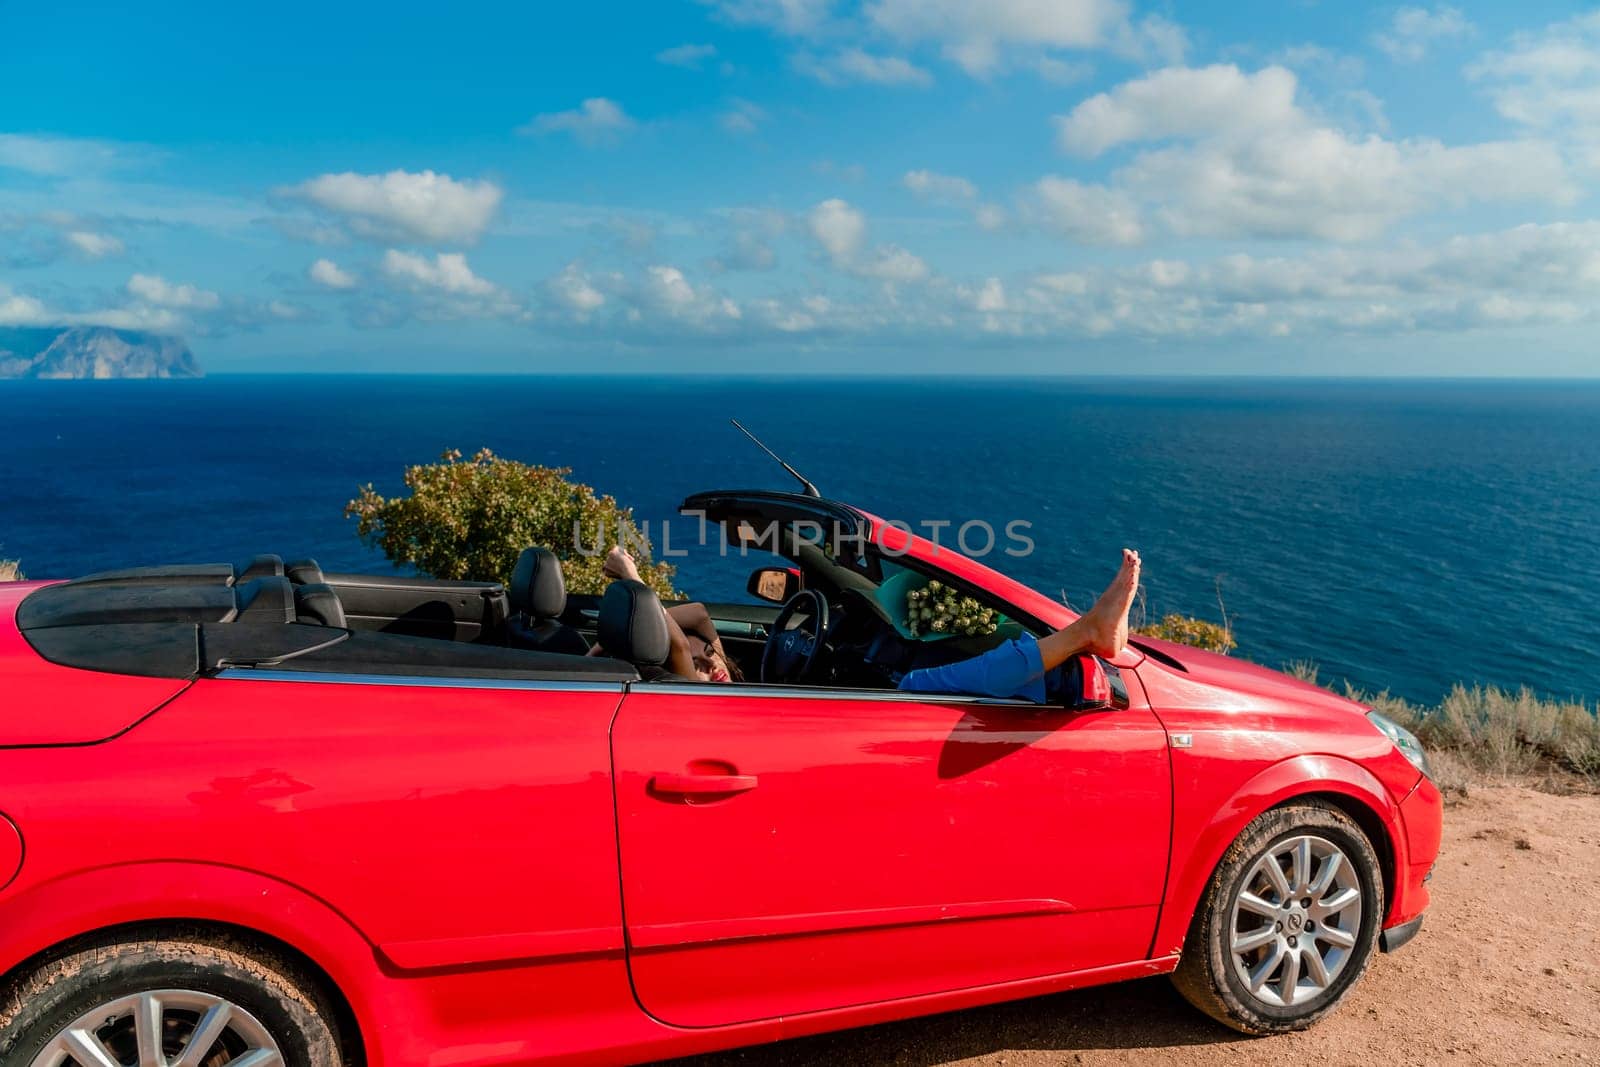 A woman is laying on her feet in a red car, looking out the window at the ocean.